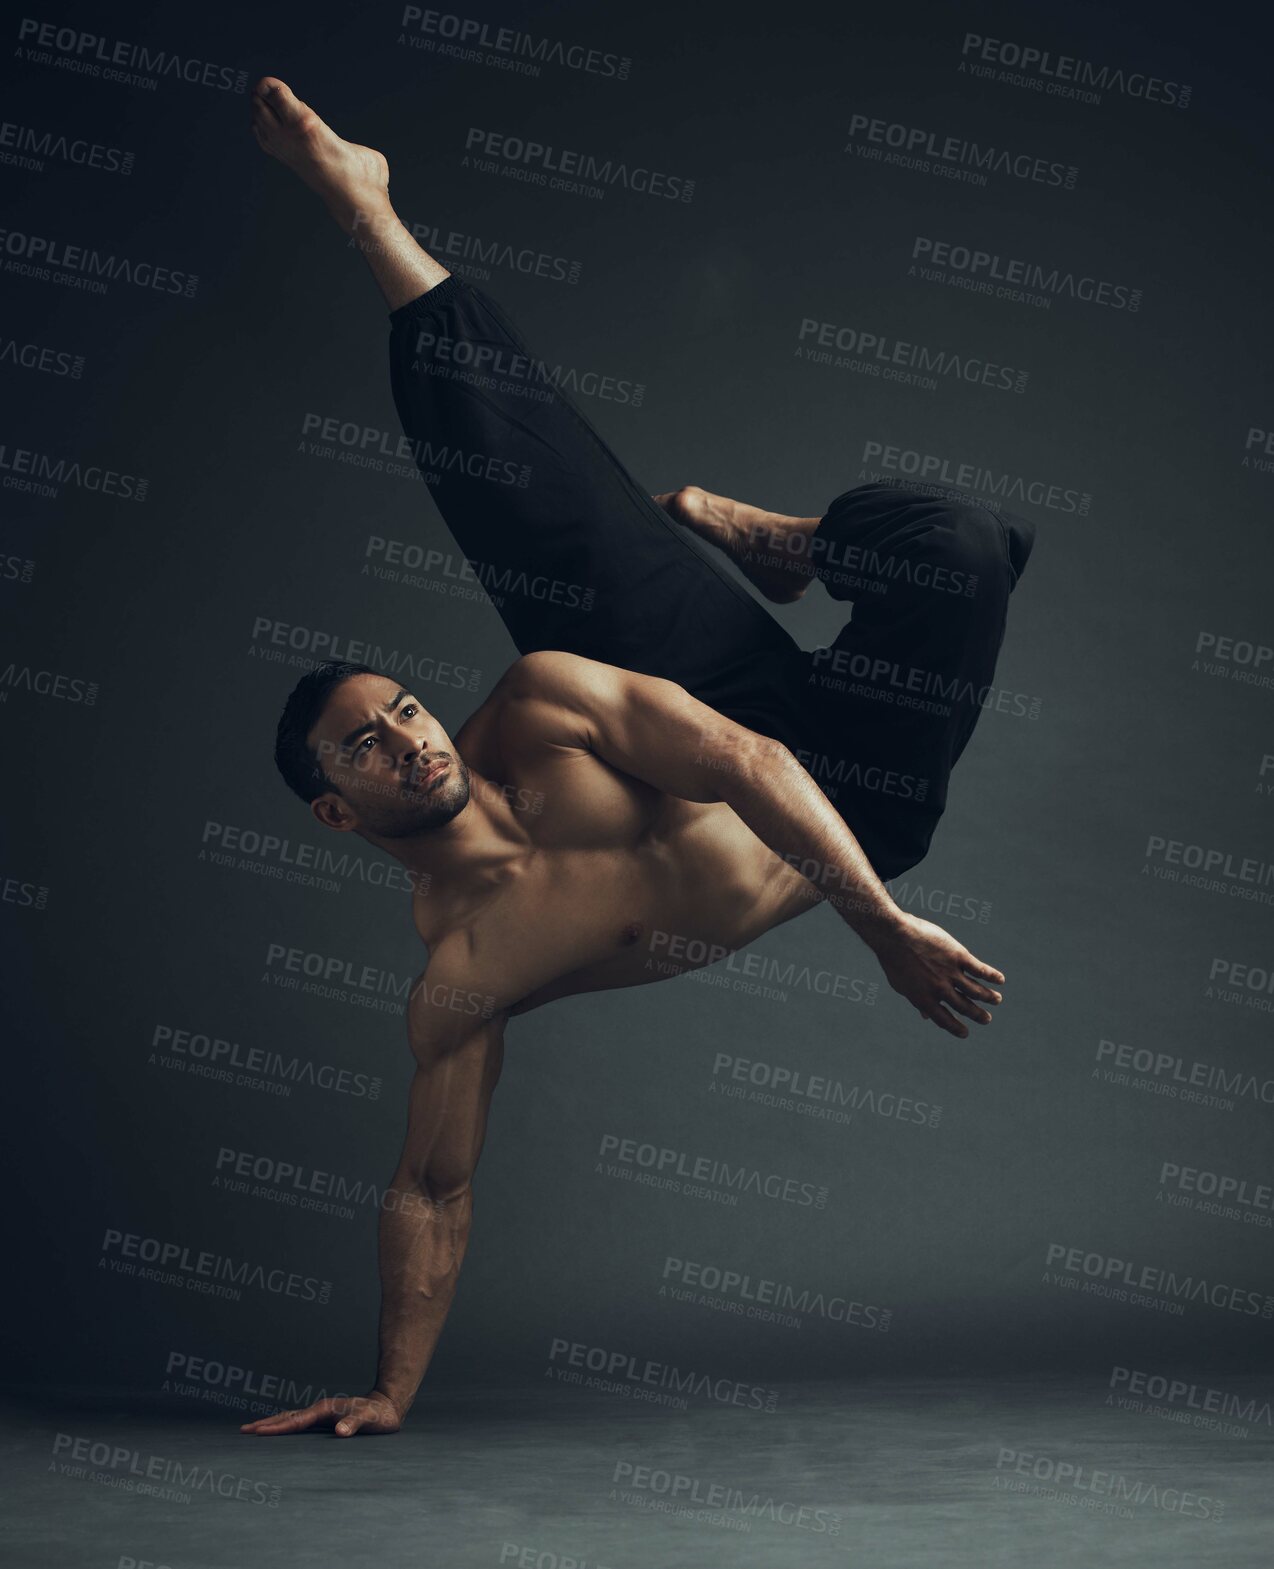 Buy stock photo Full length shot of a handsome young man performing a martial arts kick in the studio